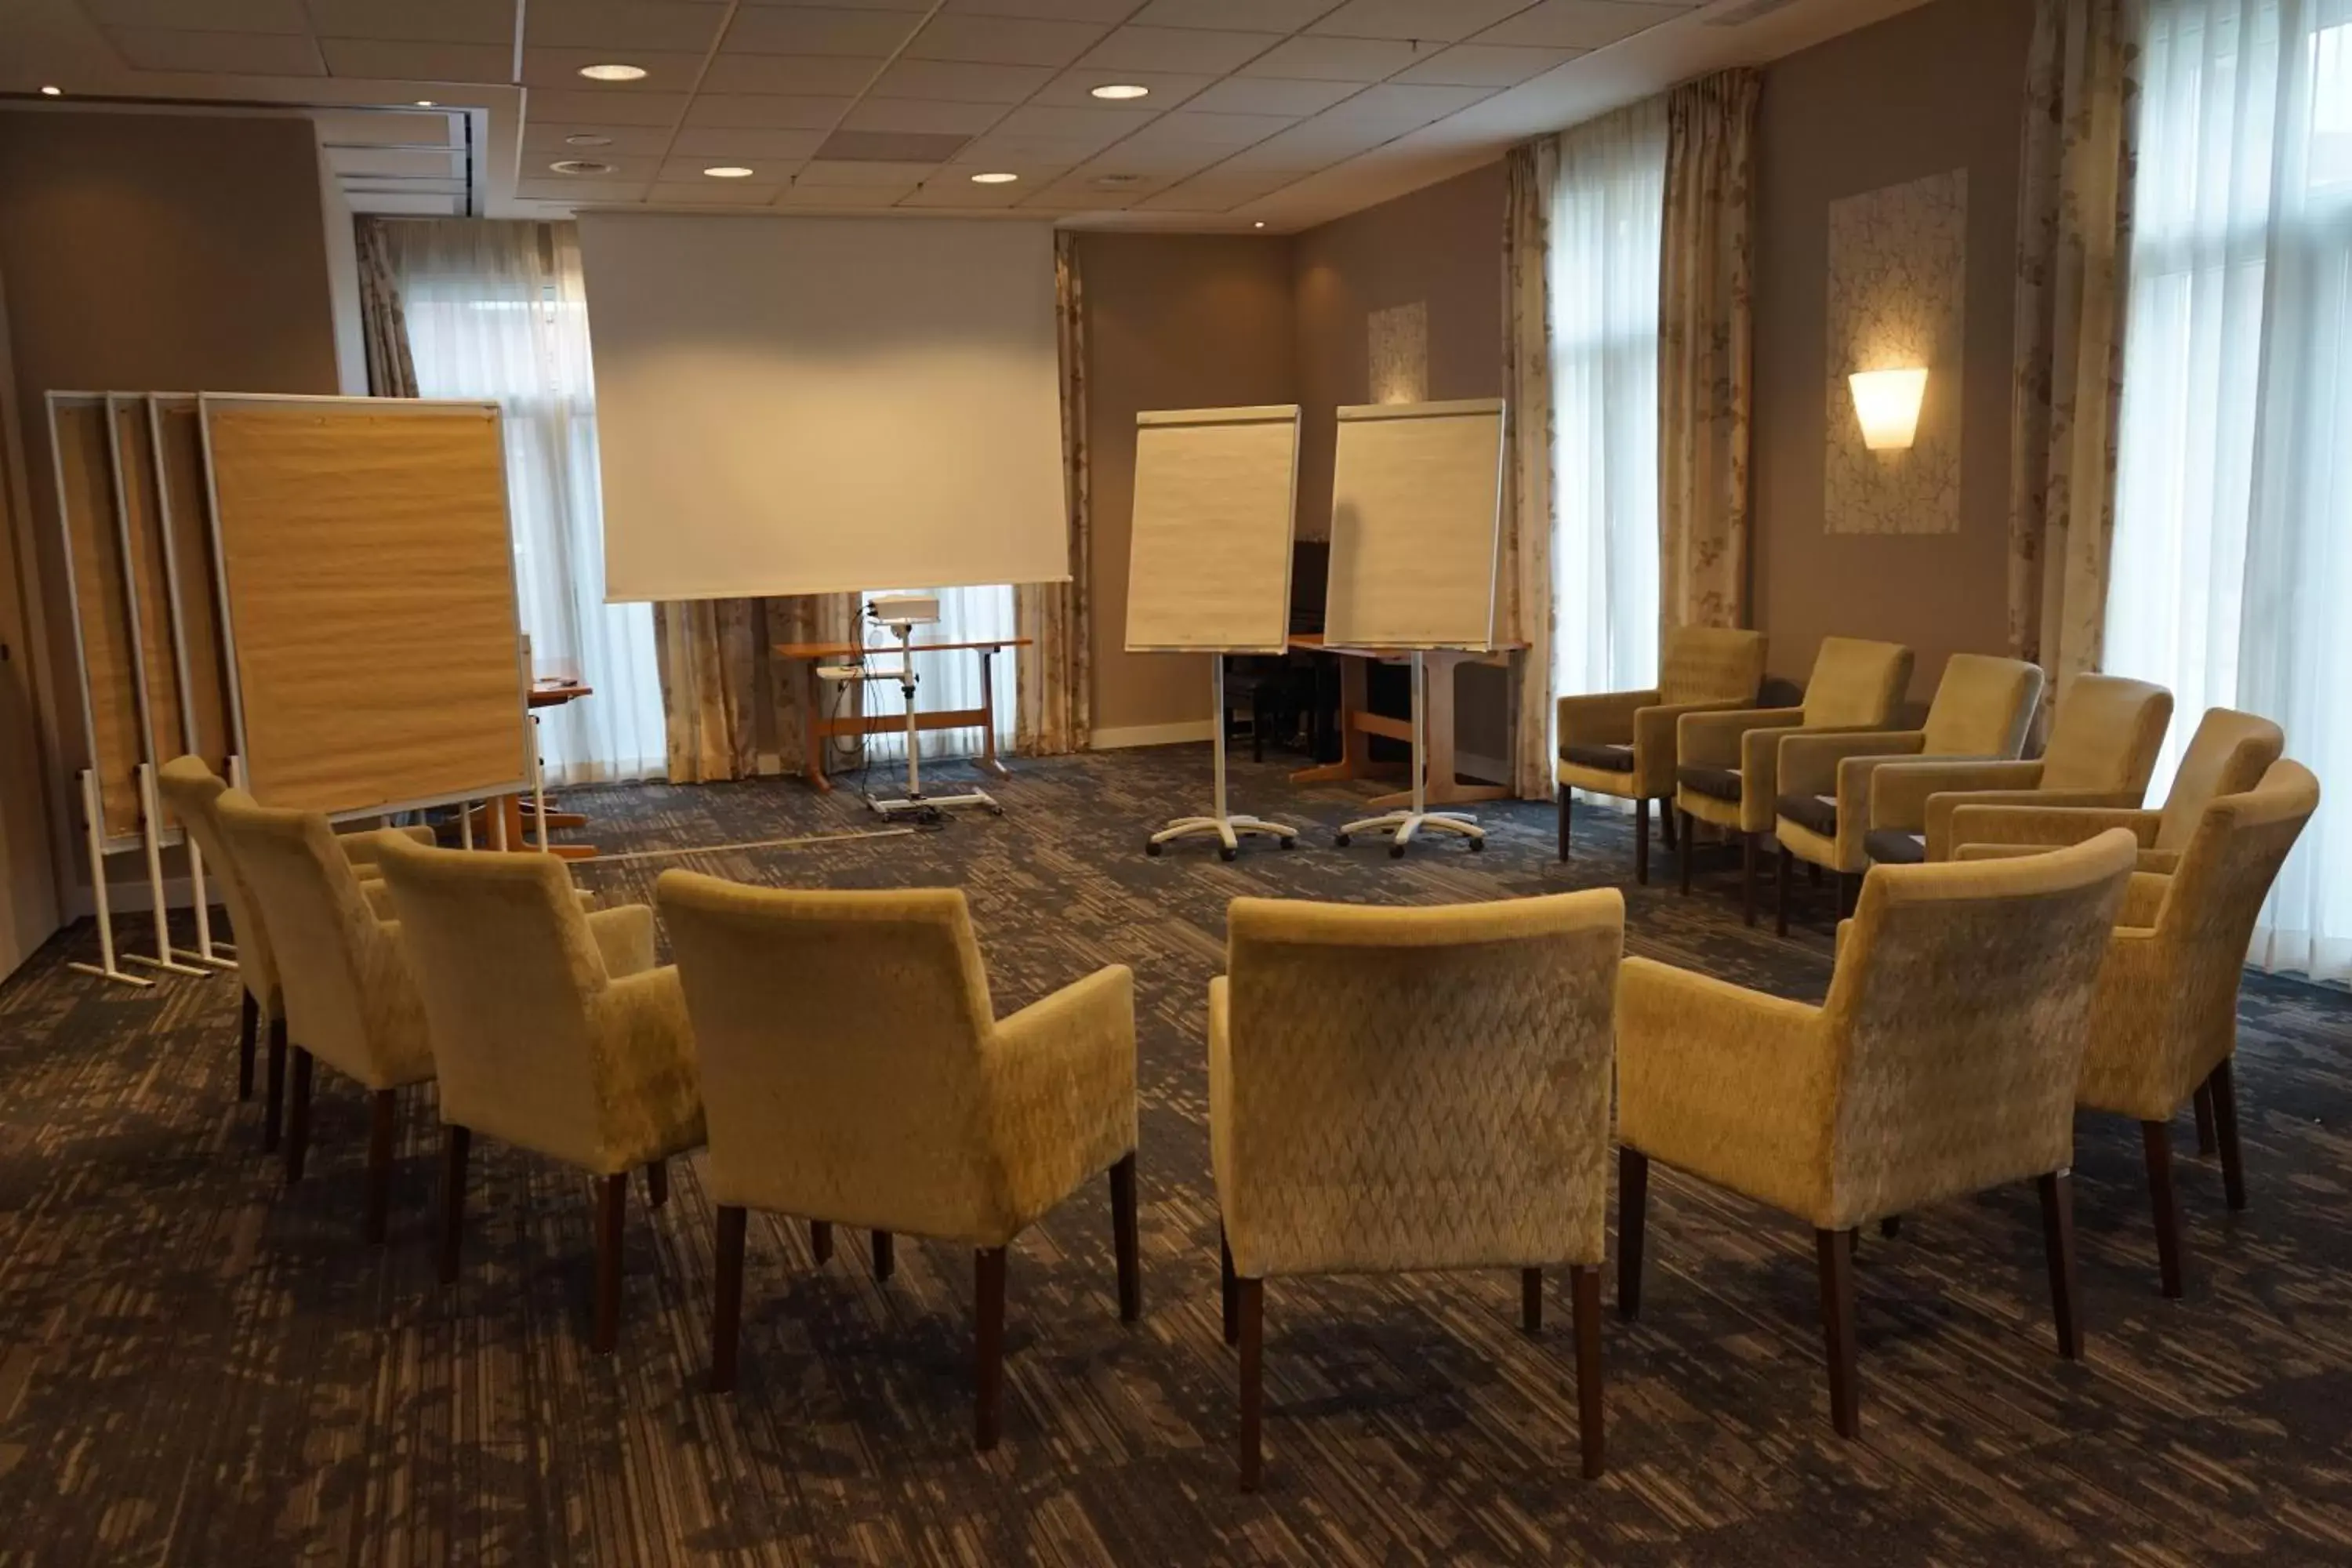 Business facilities in Ringhotel Appelbaum